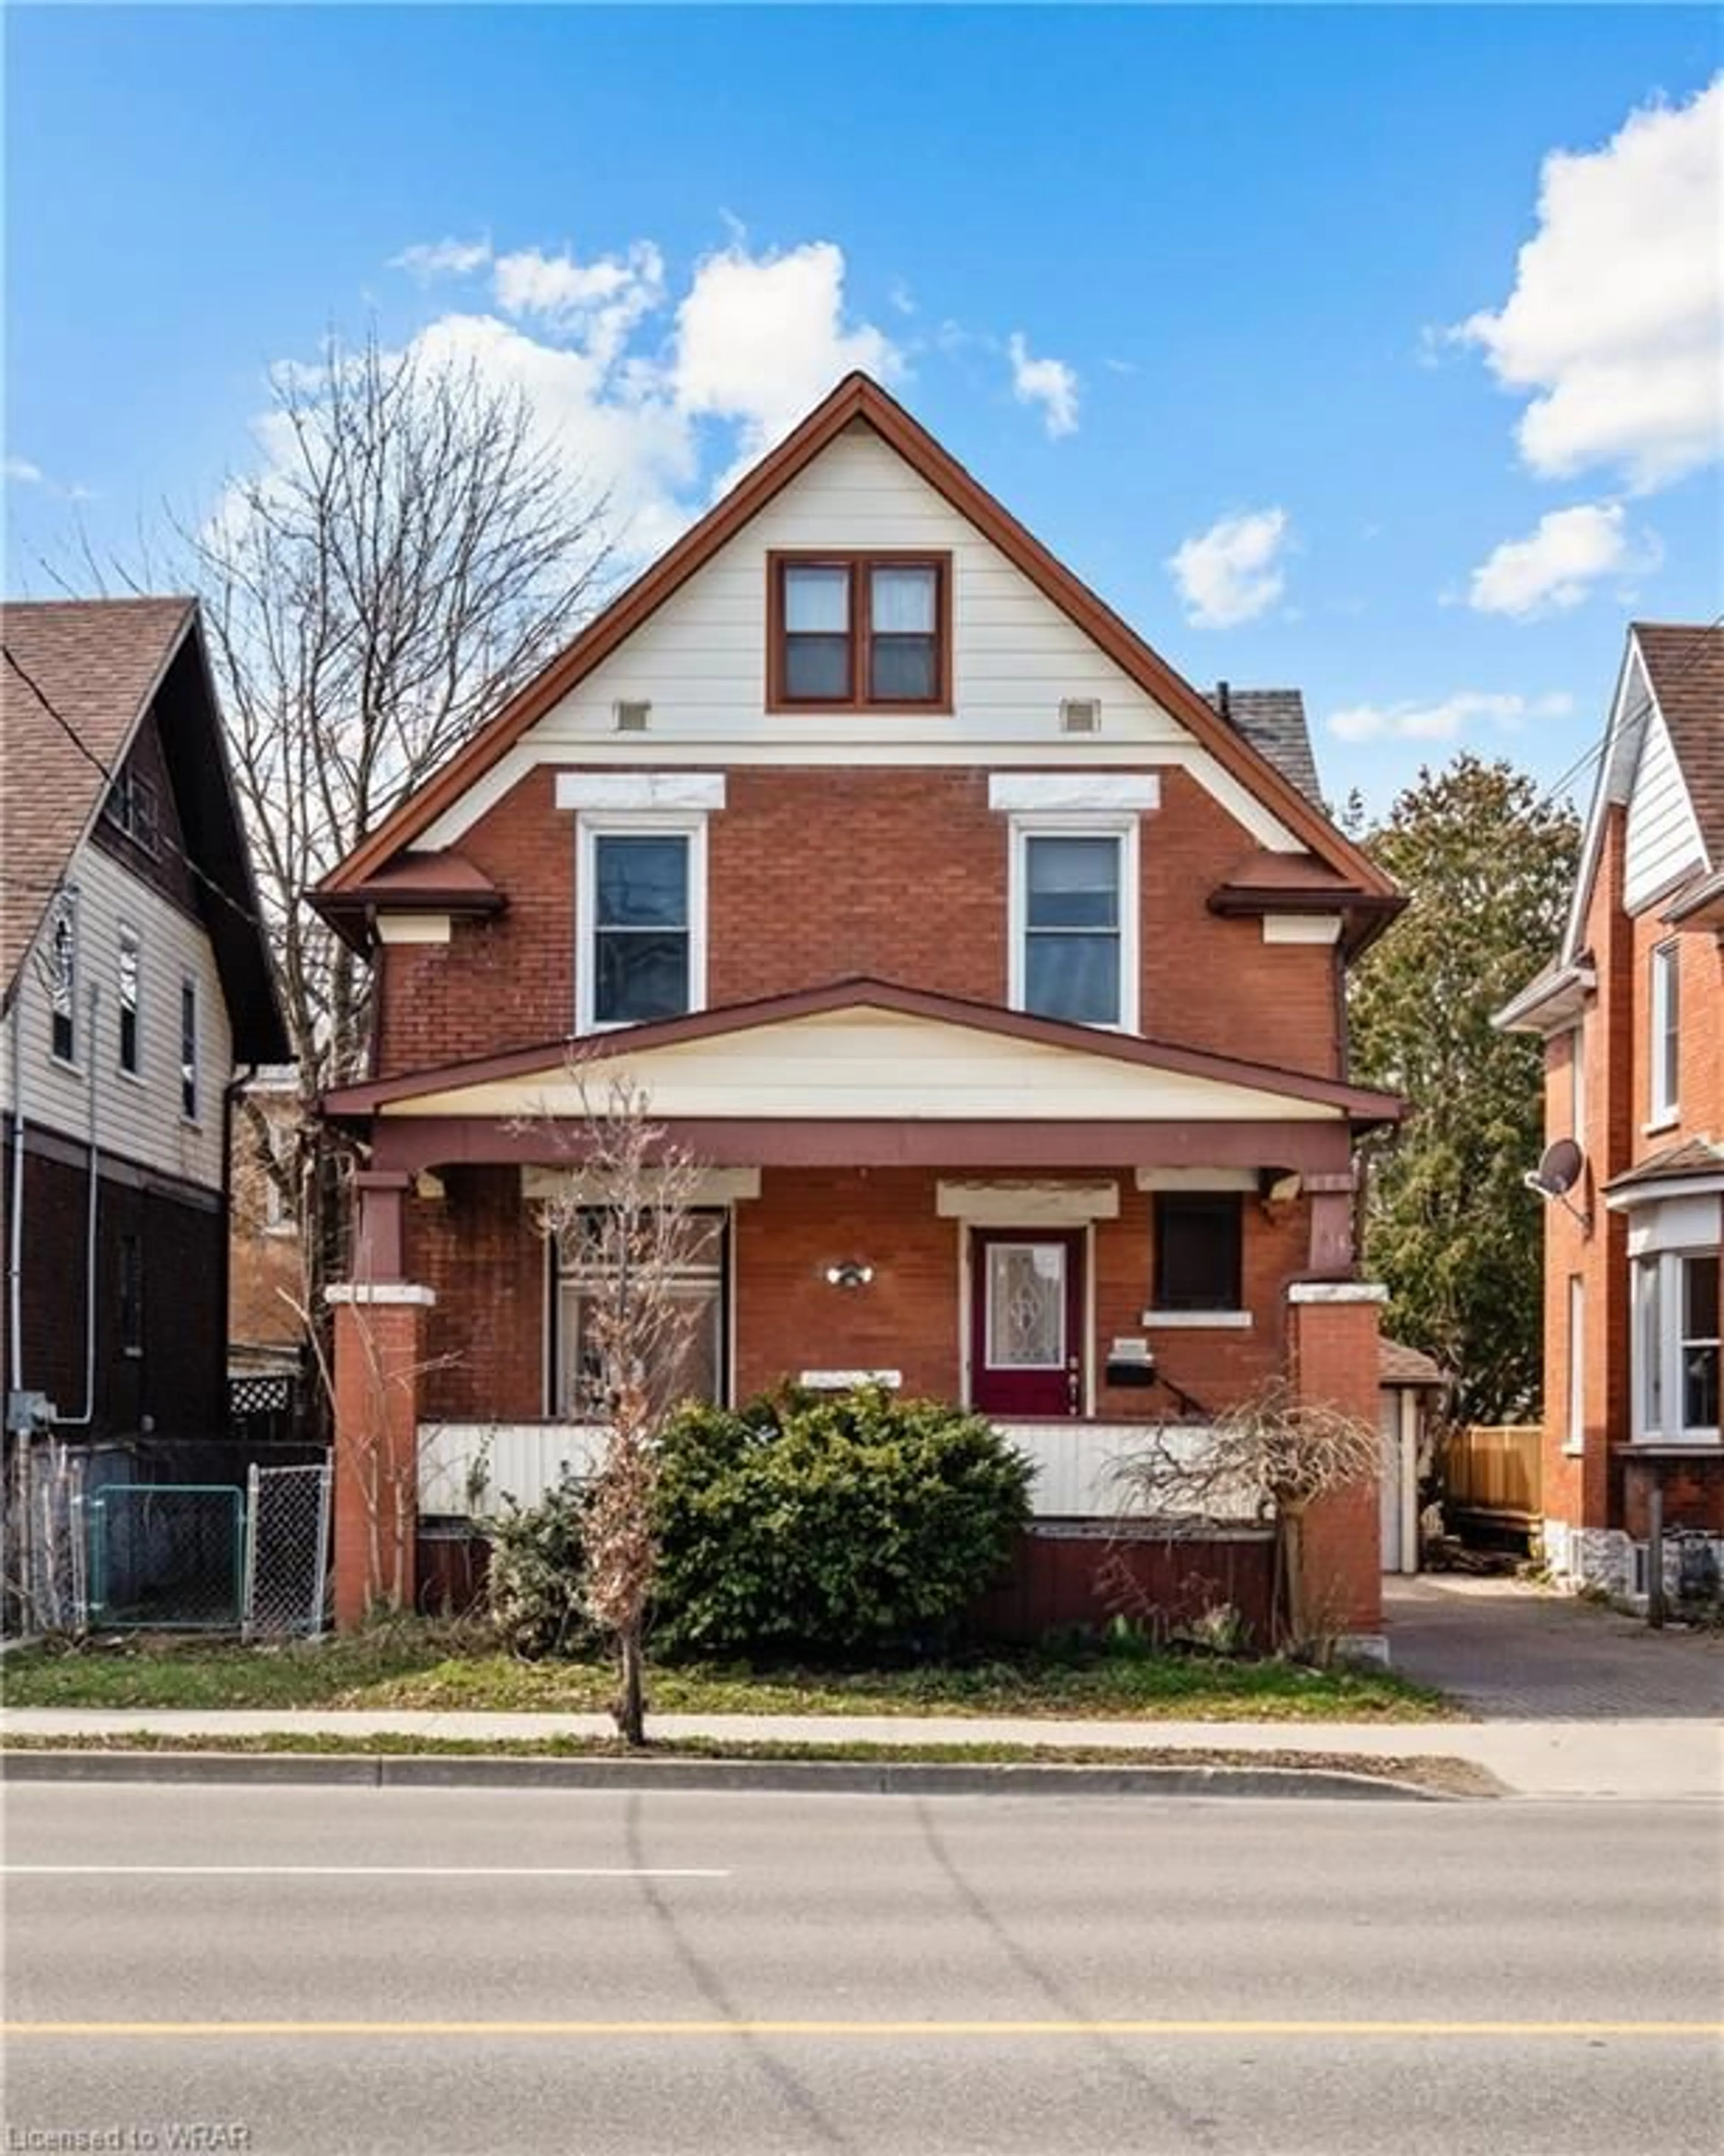 Home with brick exterior material for 173 Weber St, Kitchener Ontario N2H 1E2